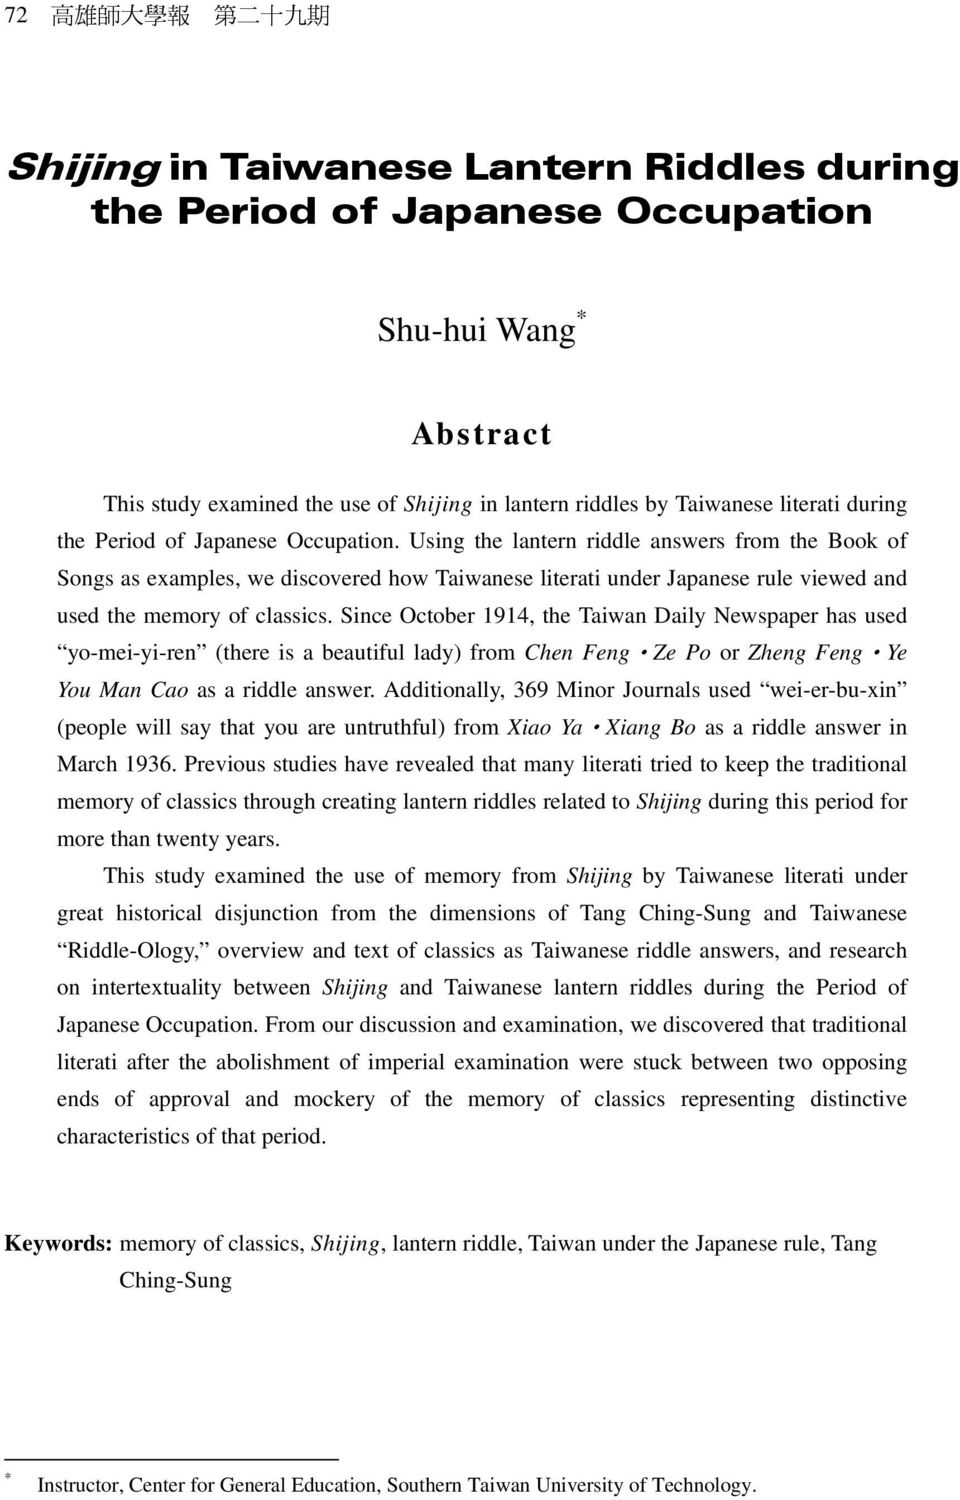 Using the lantern riddle answers from the Book of Songs as examples, we discovered how Taiwanese literati under Japanese rule viewed and used the memory of classics.